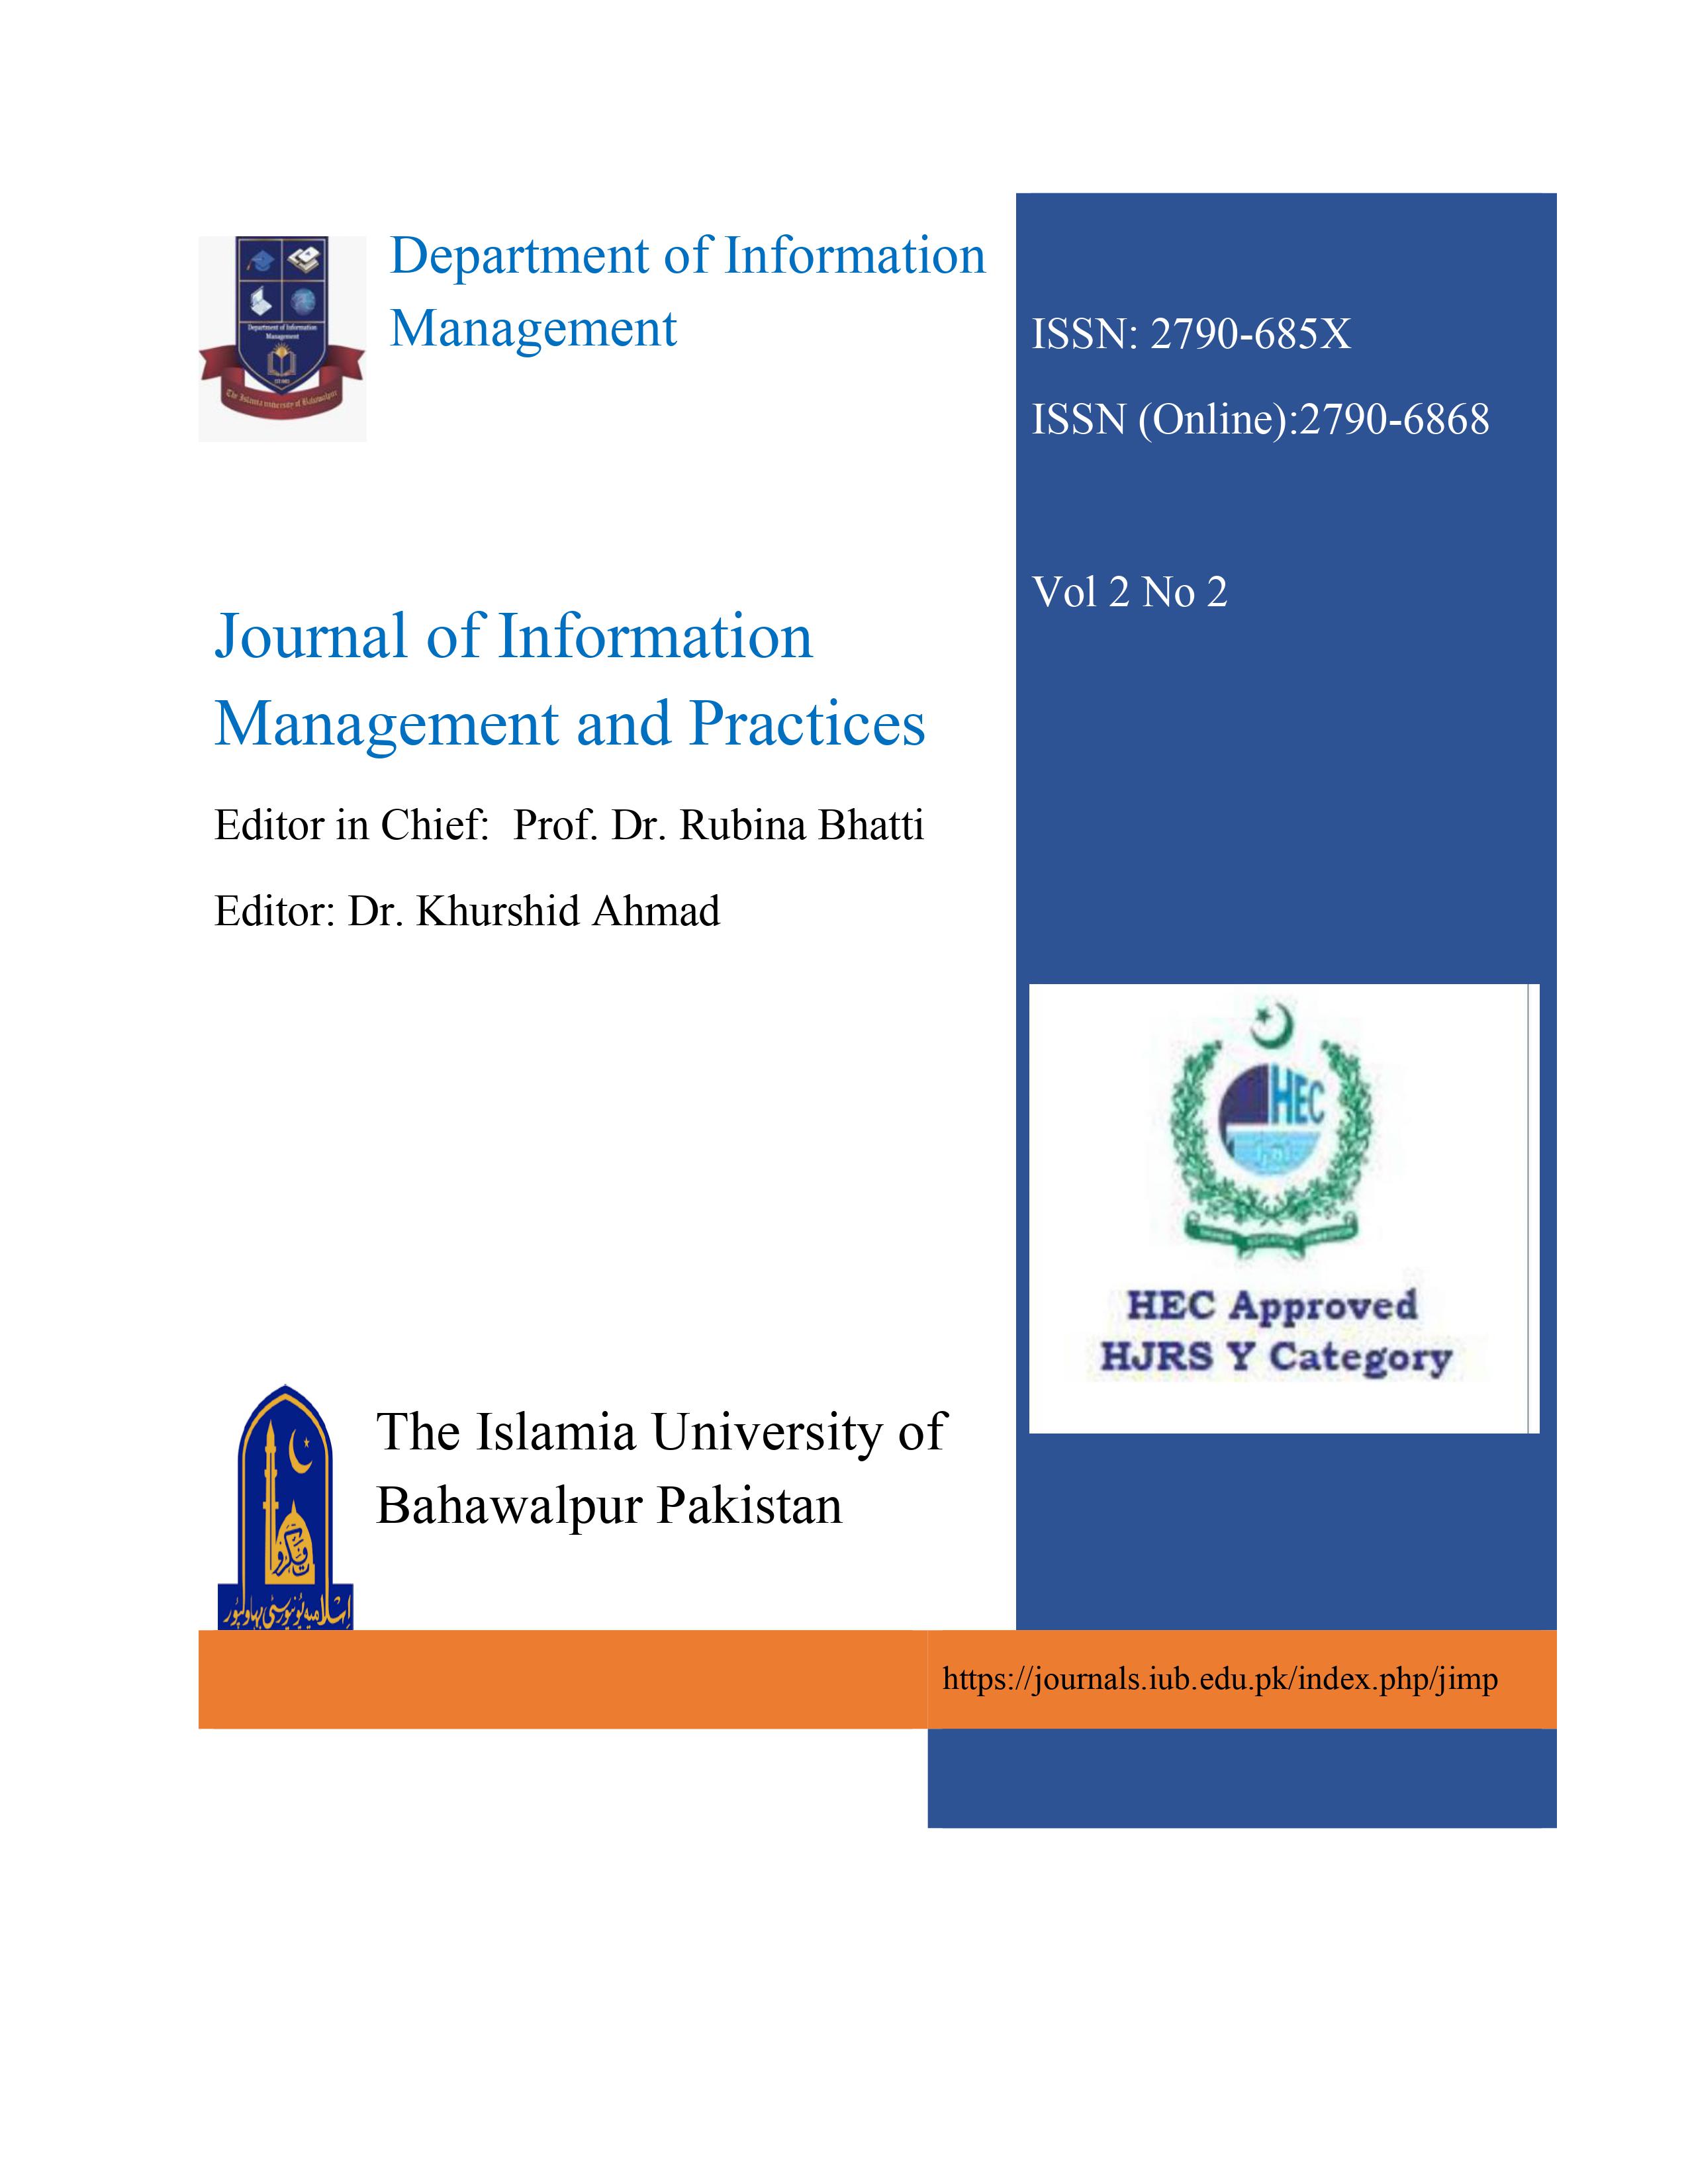 					View Vol. 2 No. 2 (2022): Journal of Information Management and Practices  
				